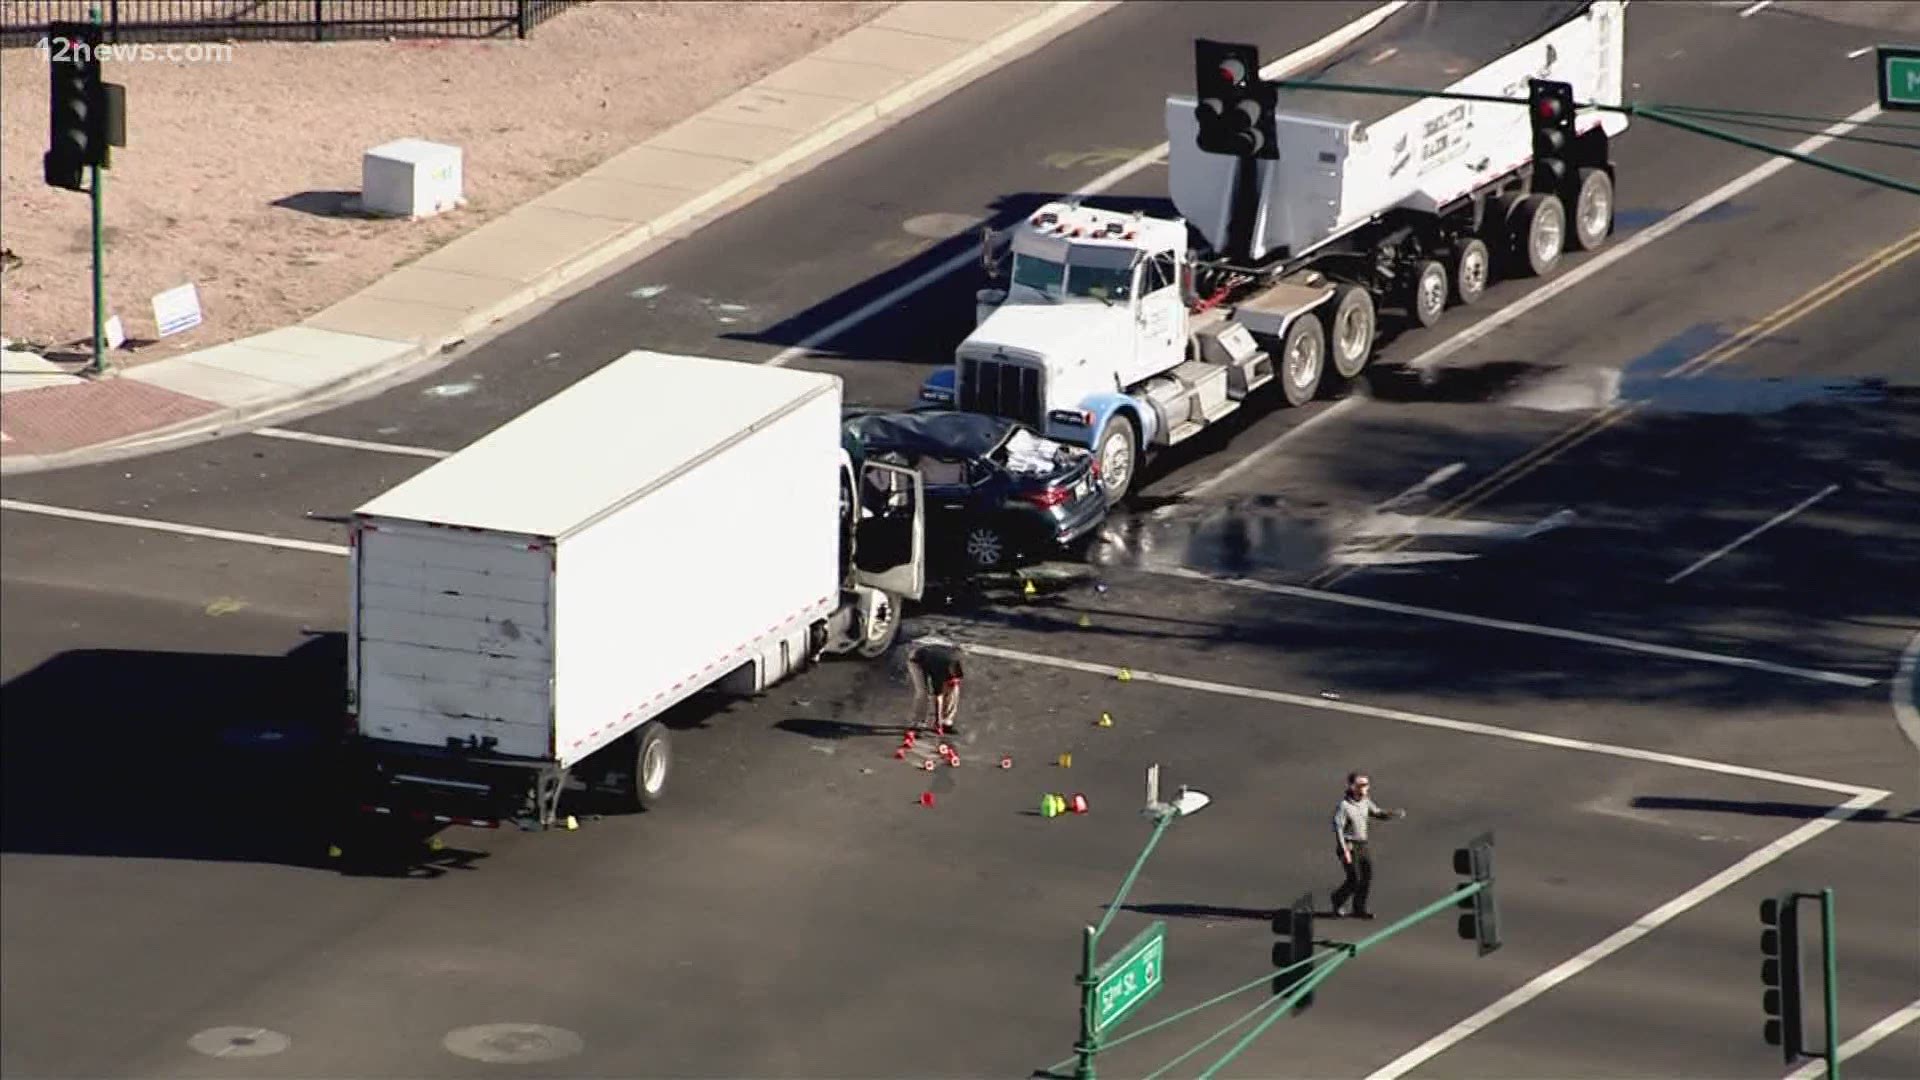 A woman and her unborn child were killed in a crash in Phoenix on Wednesday afternoon.